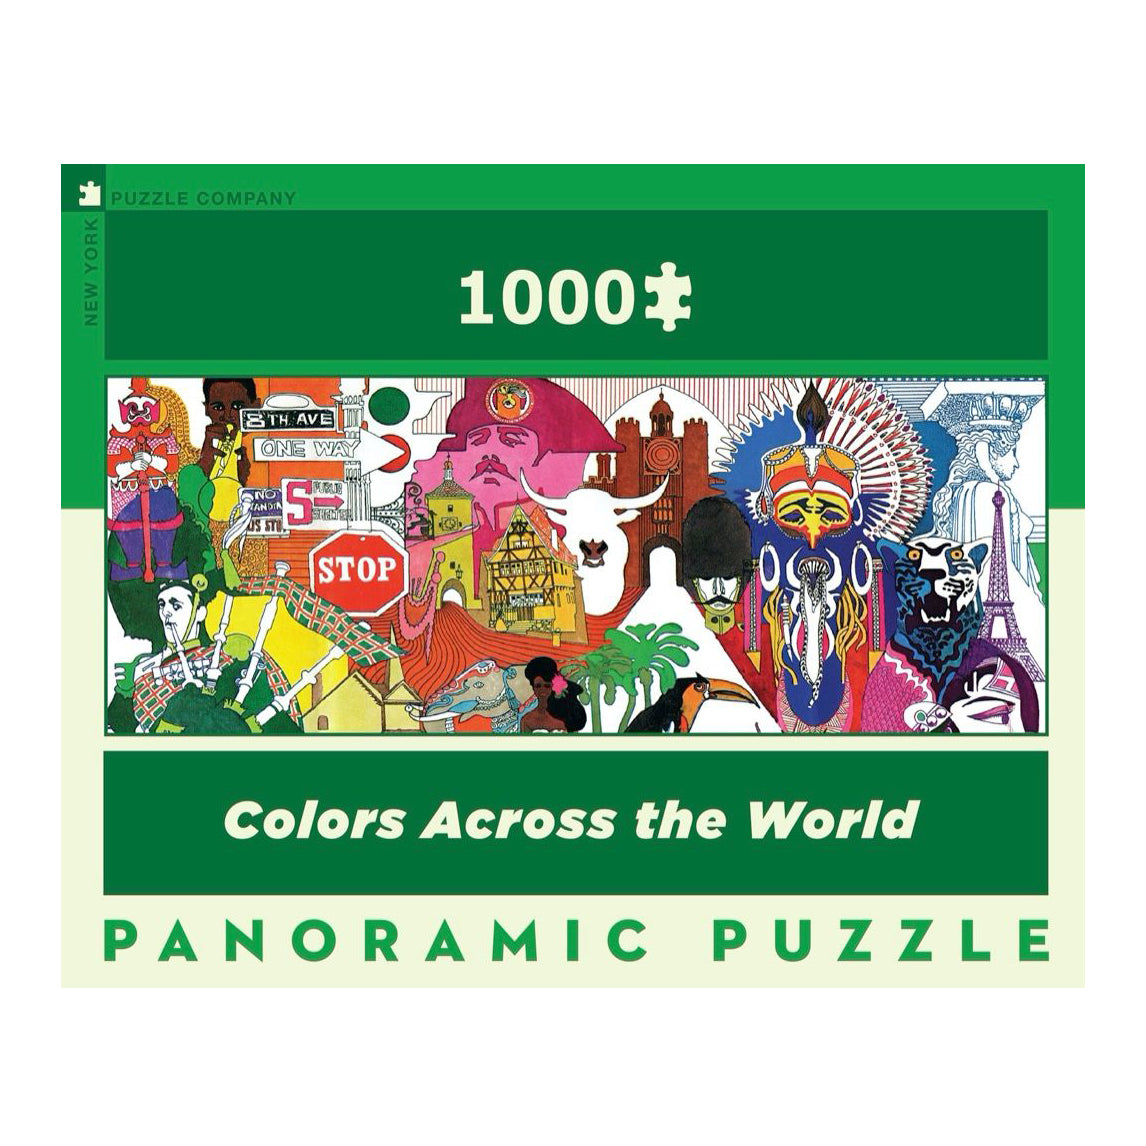 Puzzel Colors Across the World│American Airlines│New York Puzzle Company│art. NPZAA2038│voorkant verpakking